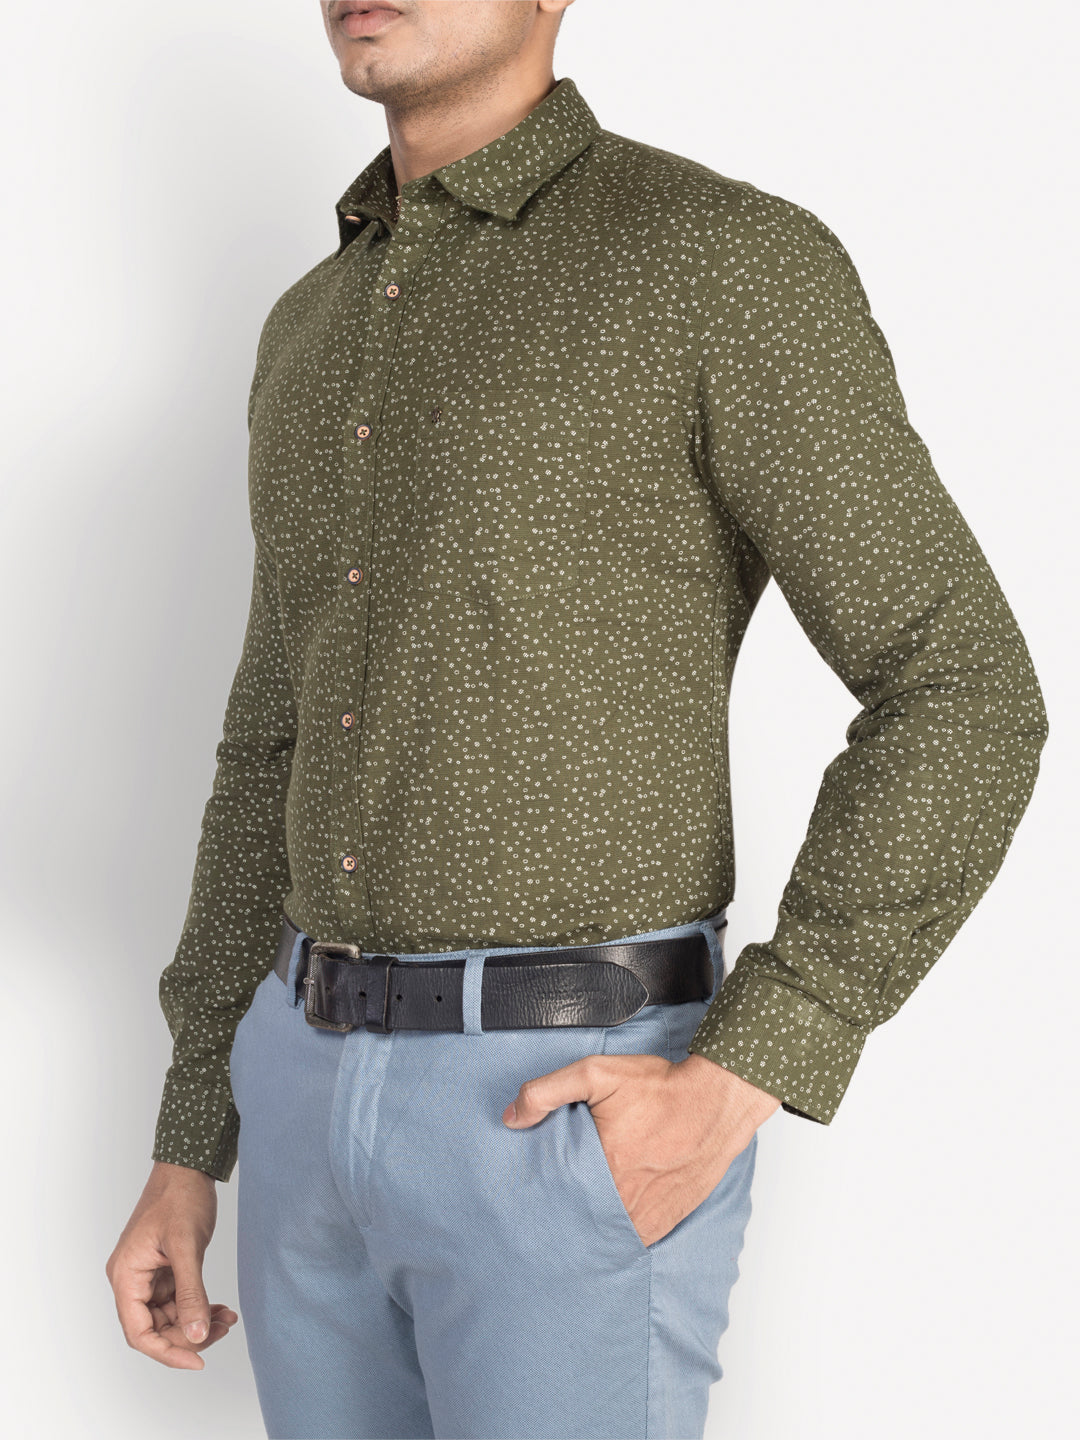 Cotton Linen Olive Printed Slim Fit Full Sleeve Casual Shirt